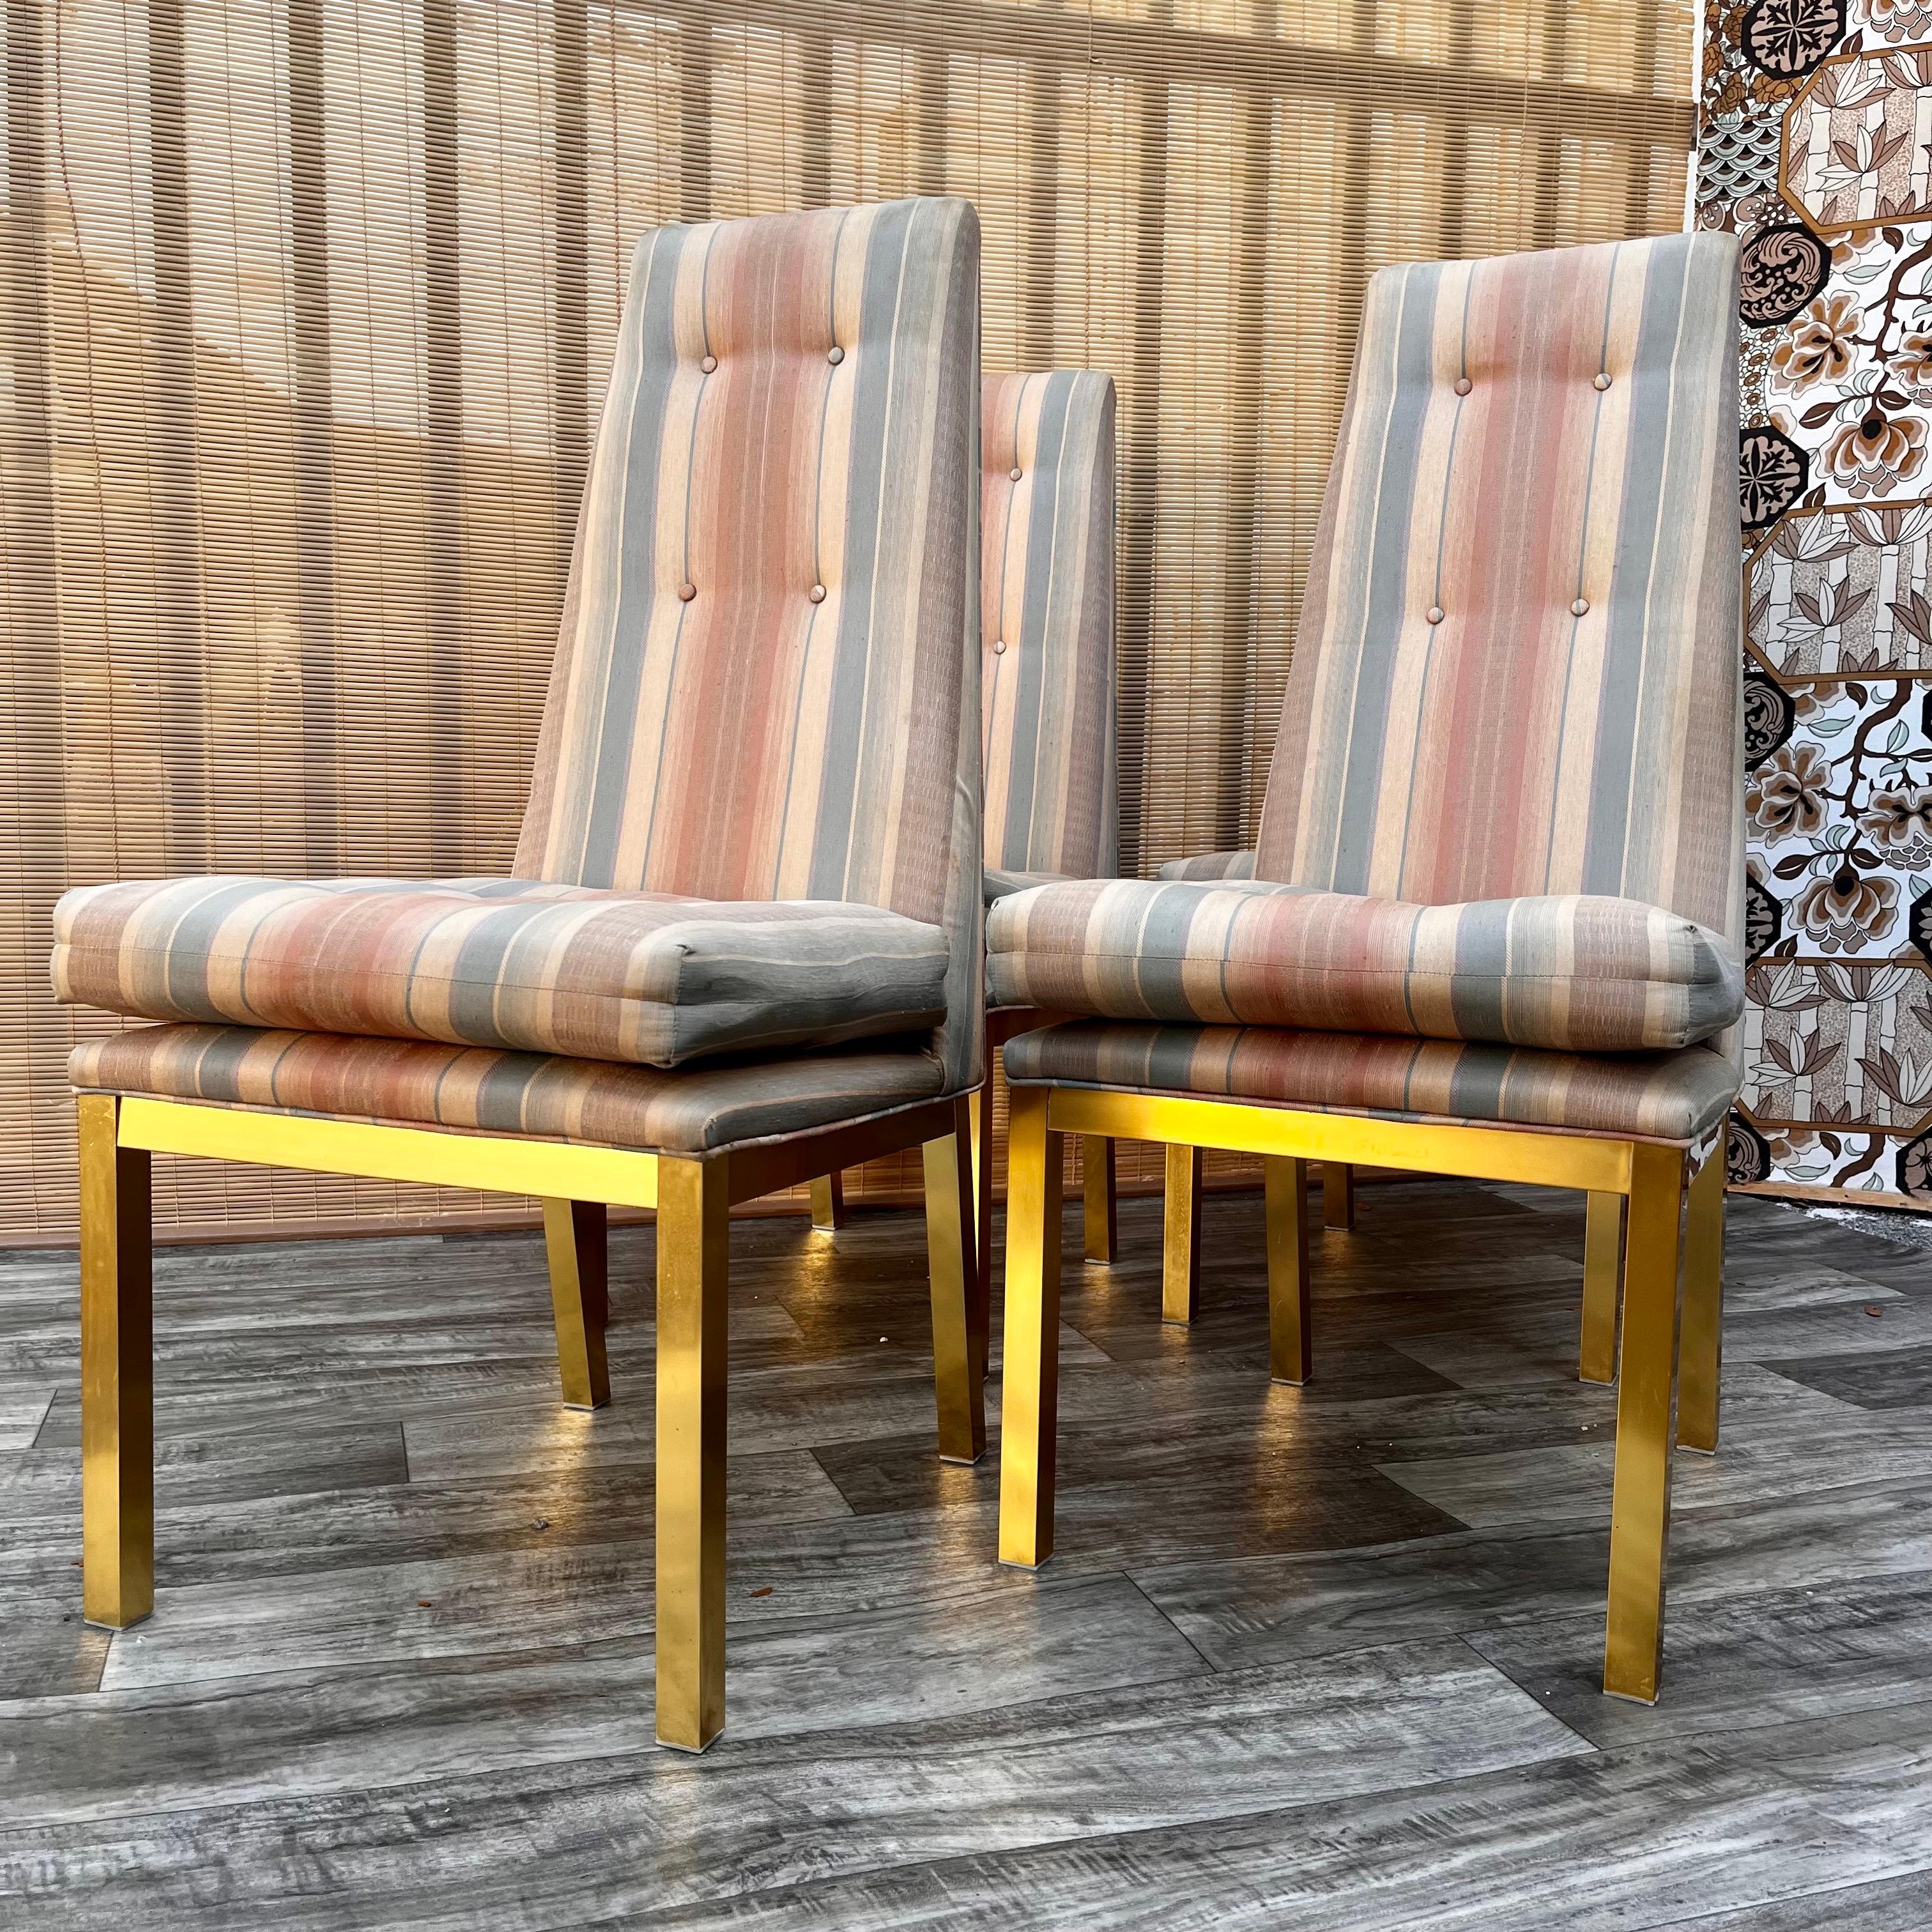 Anodized Set of Four 1960s Mid-Century Modern Dining Chairs in the Adrain Pearsall Style For Sale